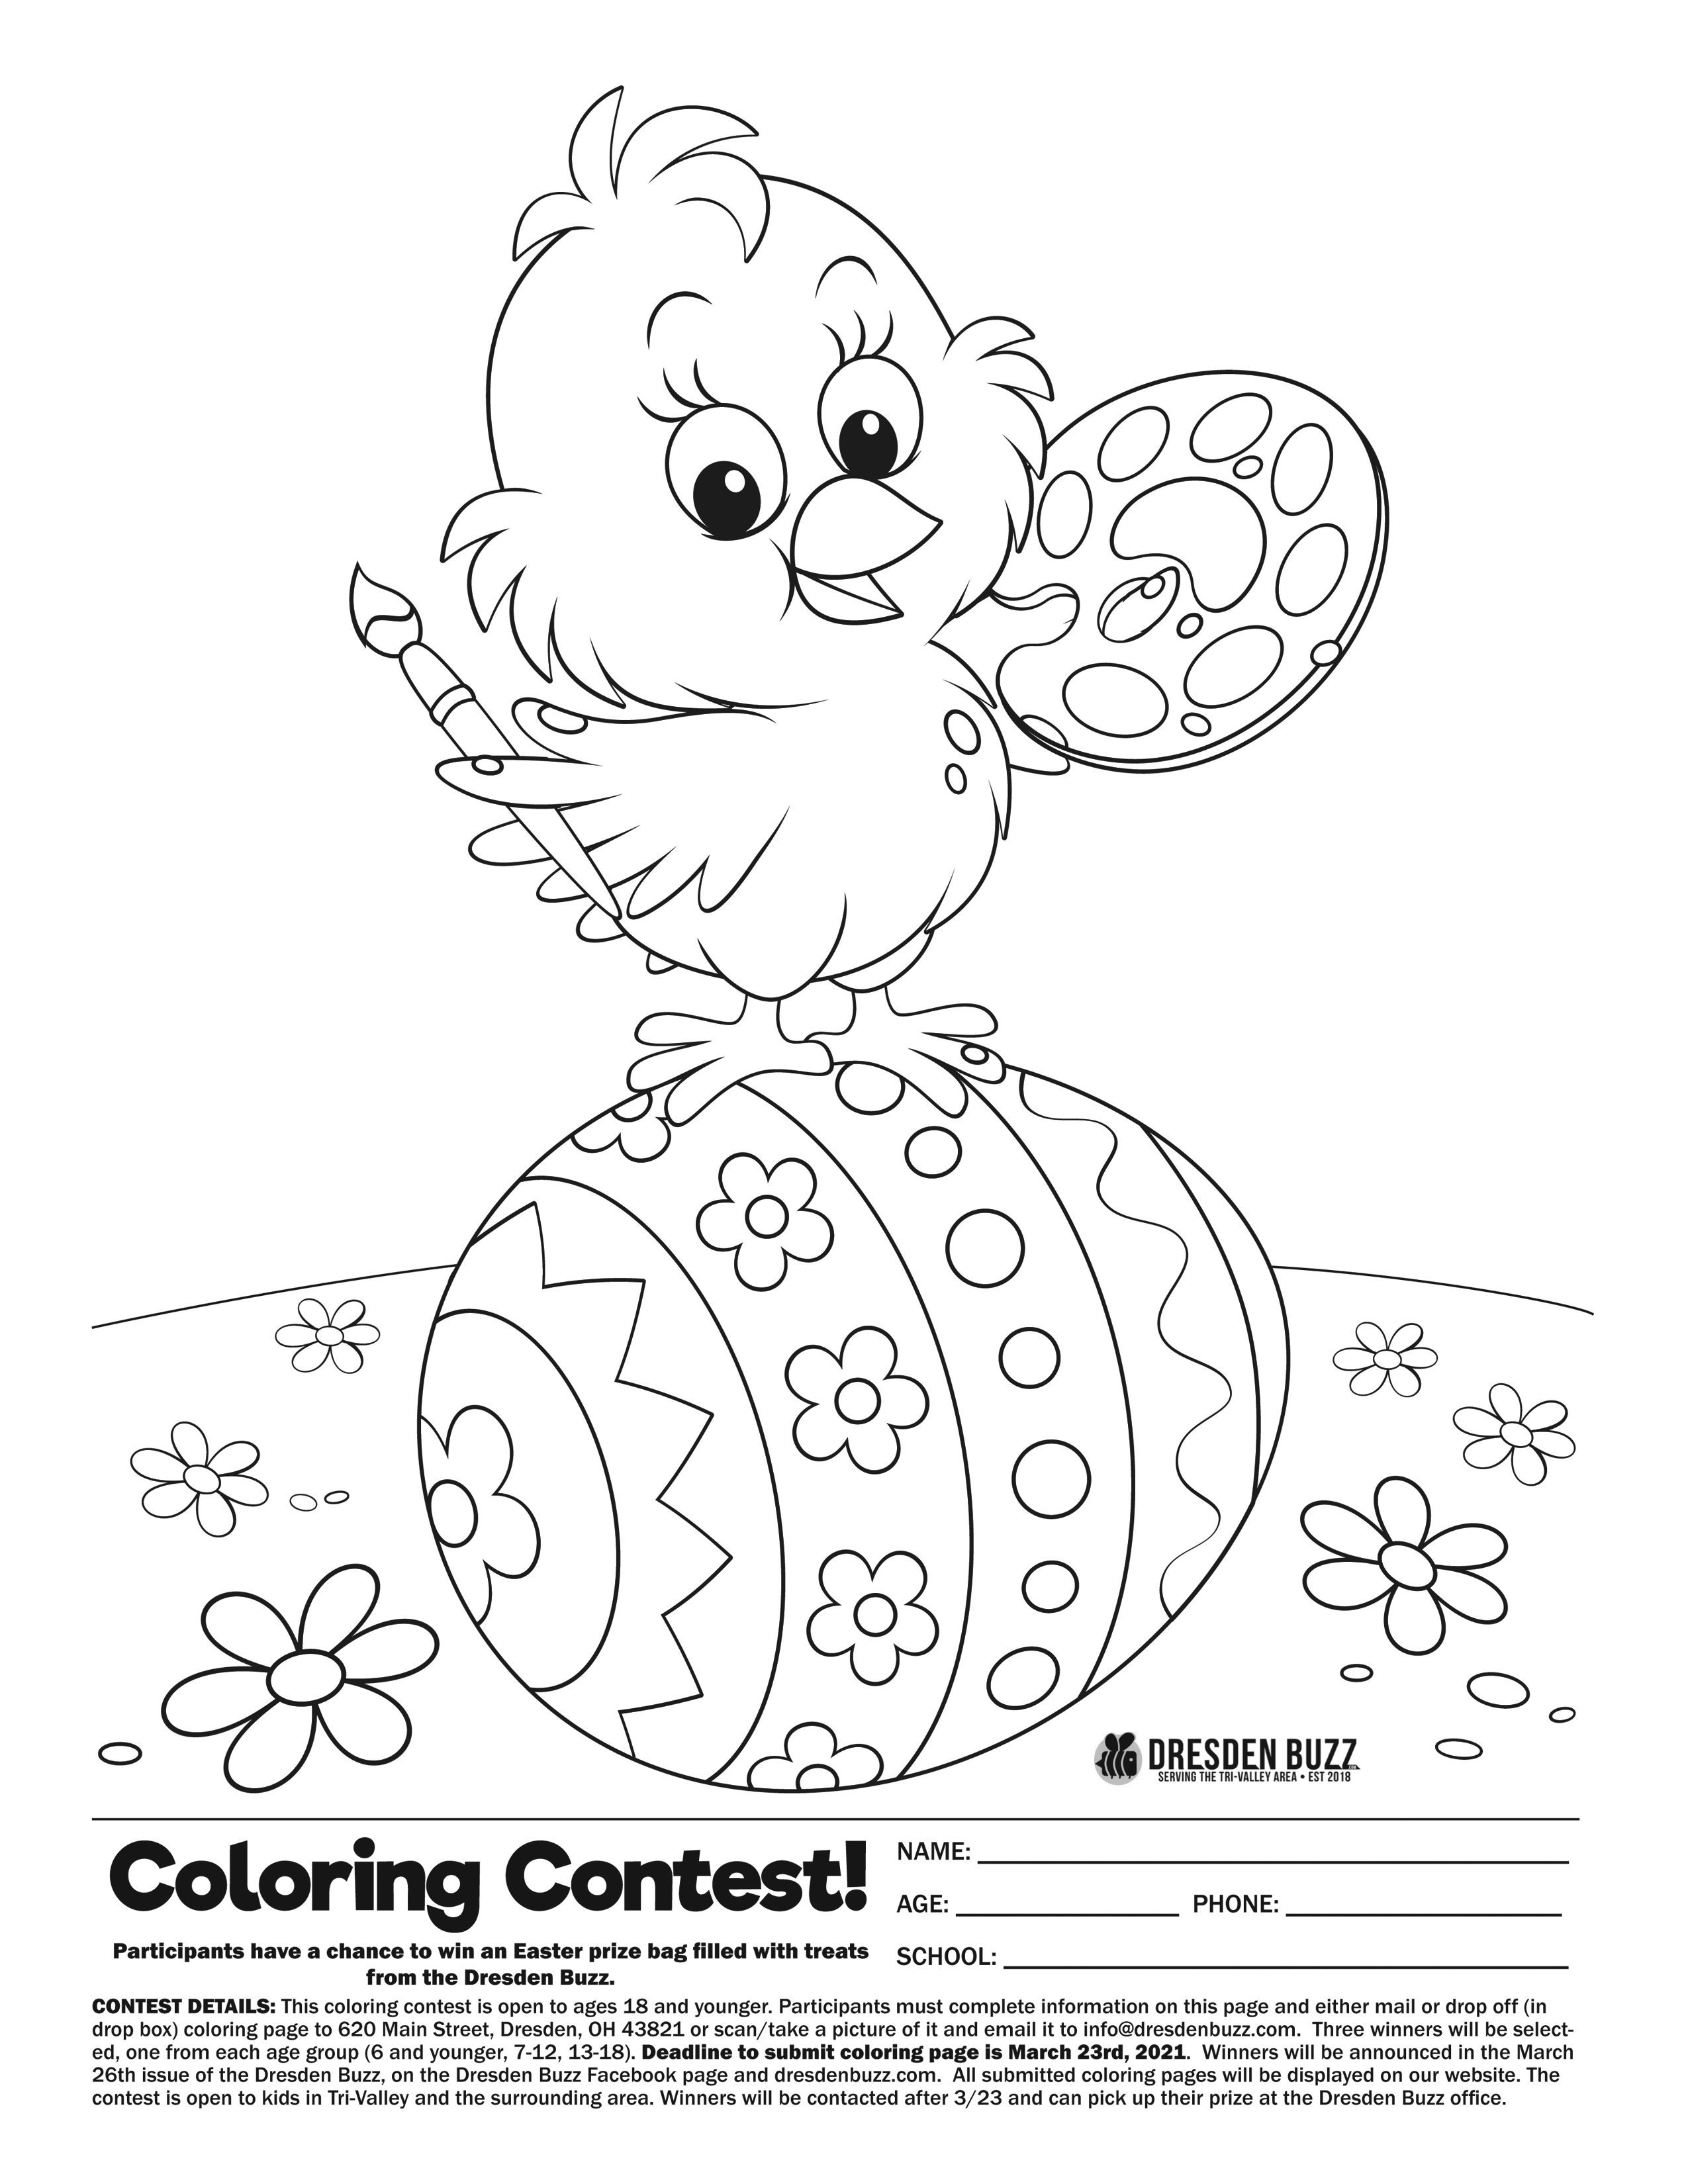 our-annual-coloring-contest-is-back-dresden-buzz